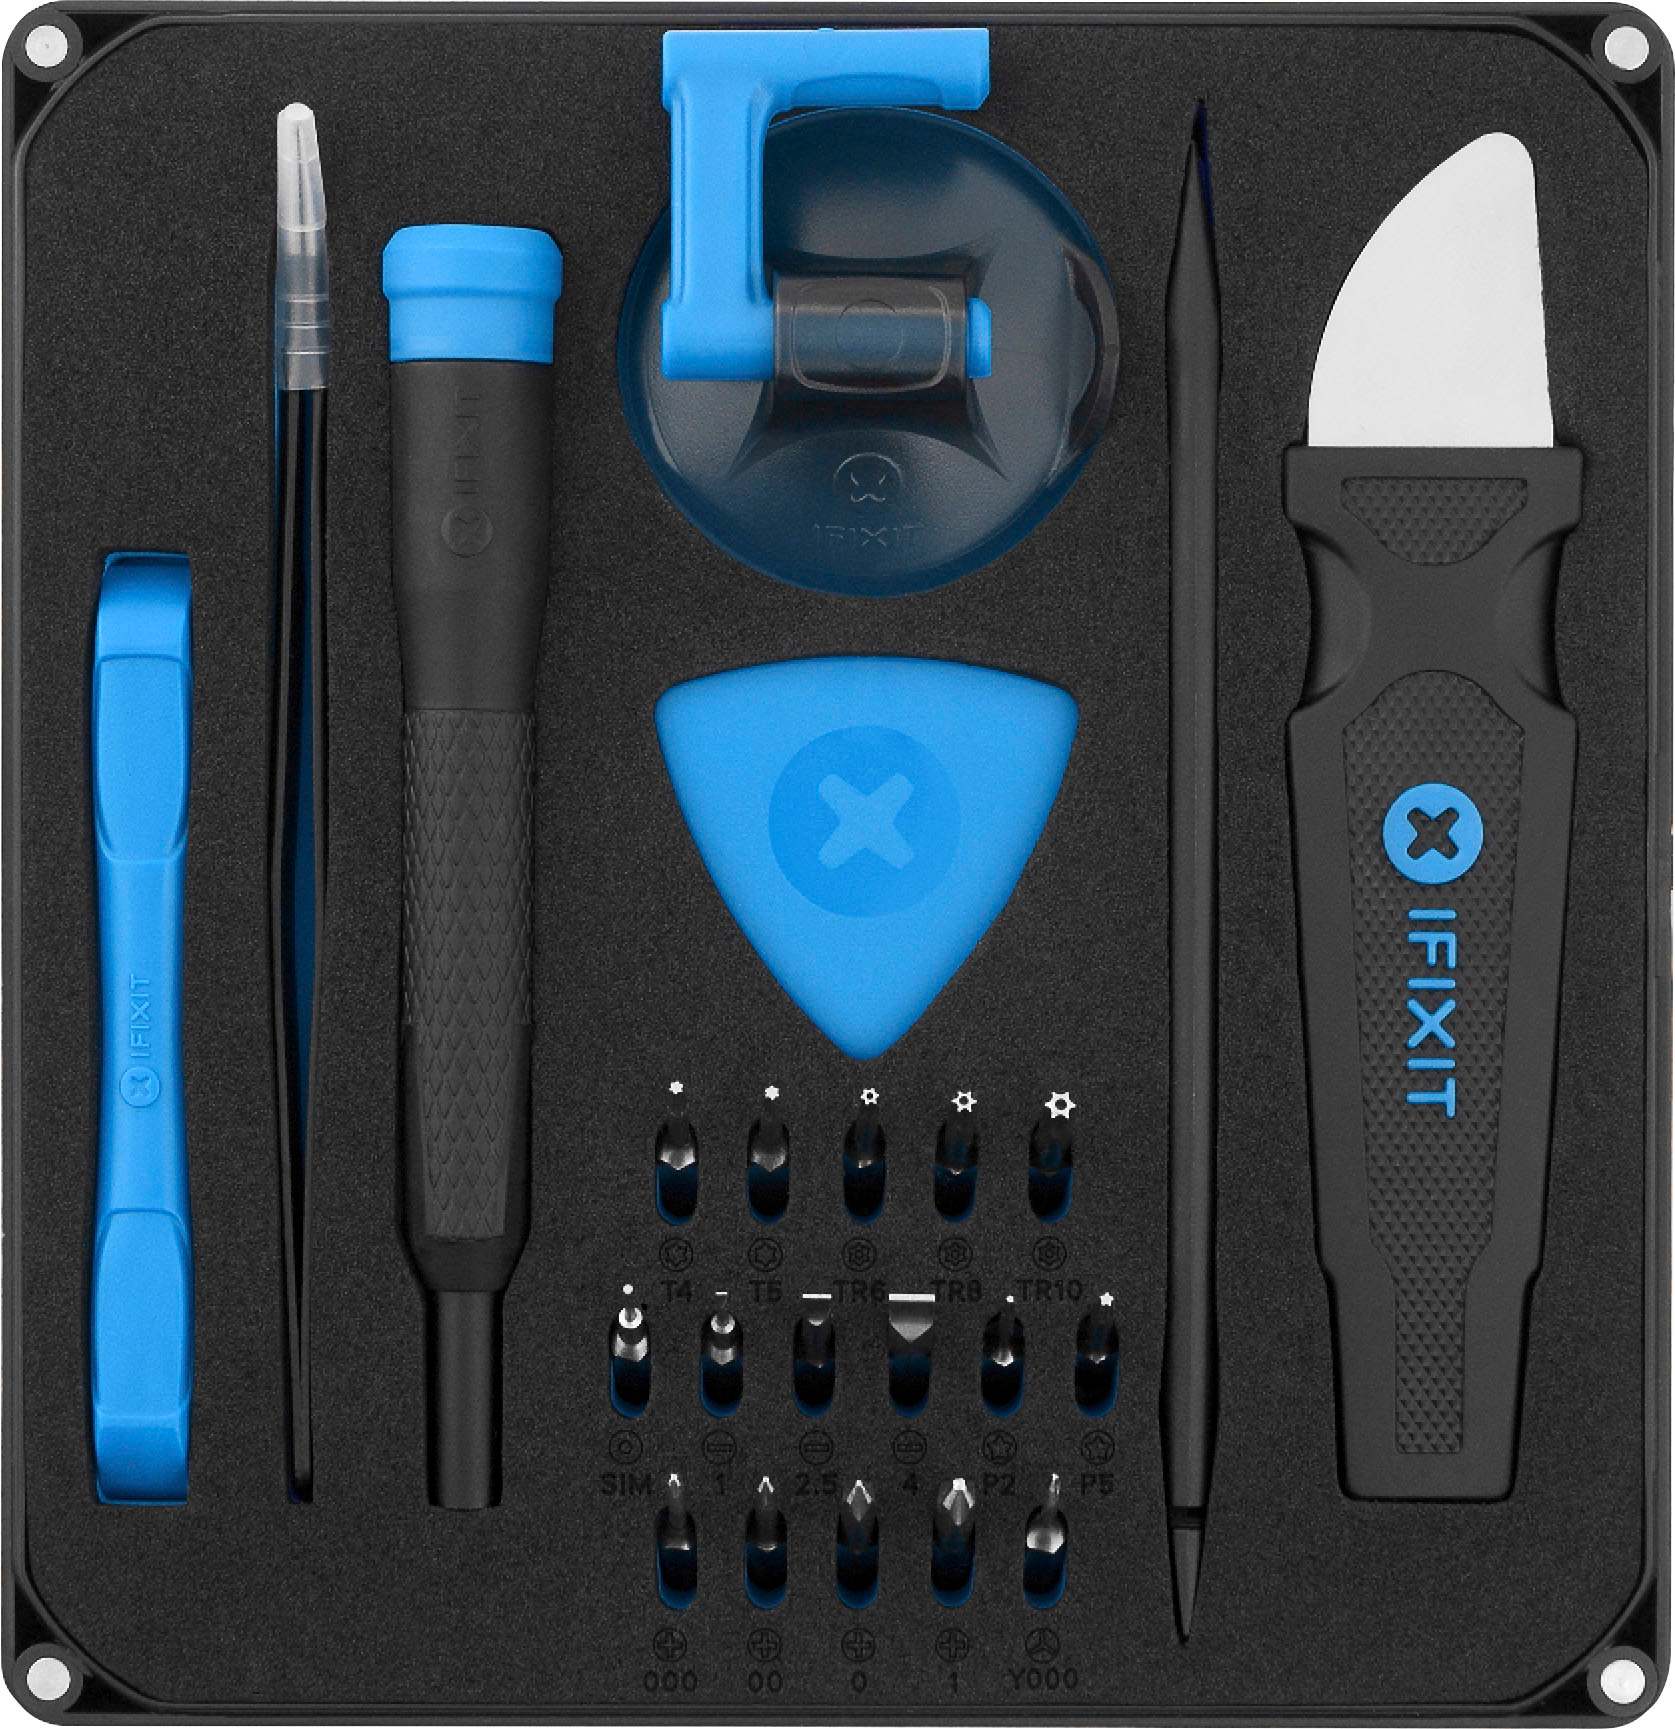 iFixit Screen Replacement Compatible with iPhone x - Fix Kit